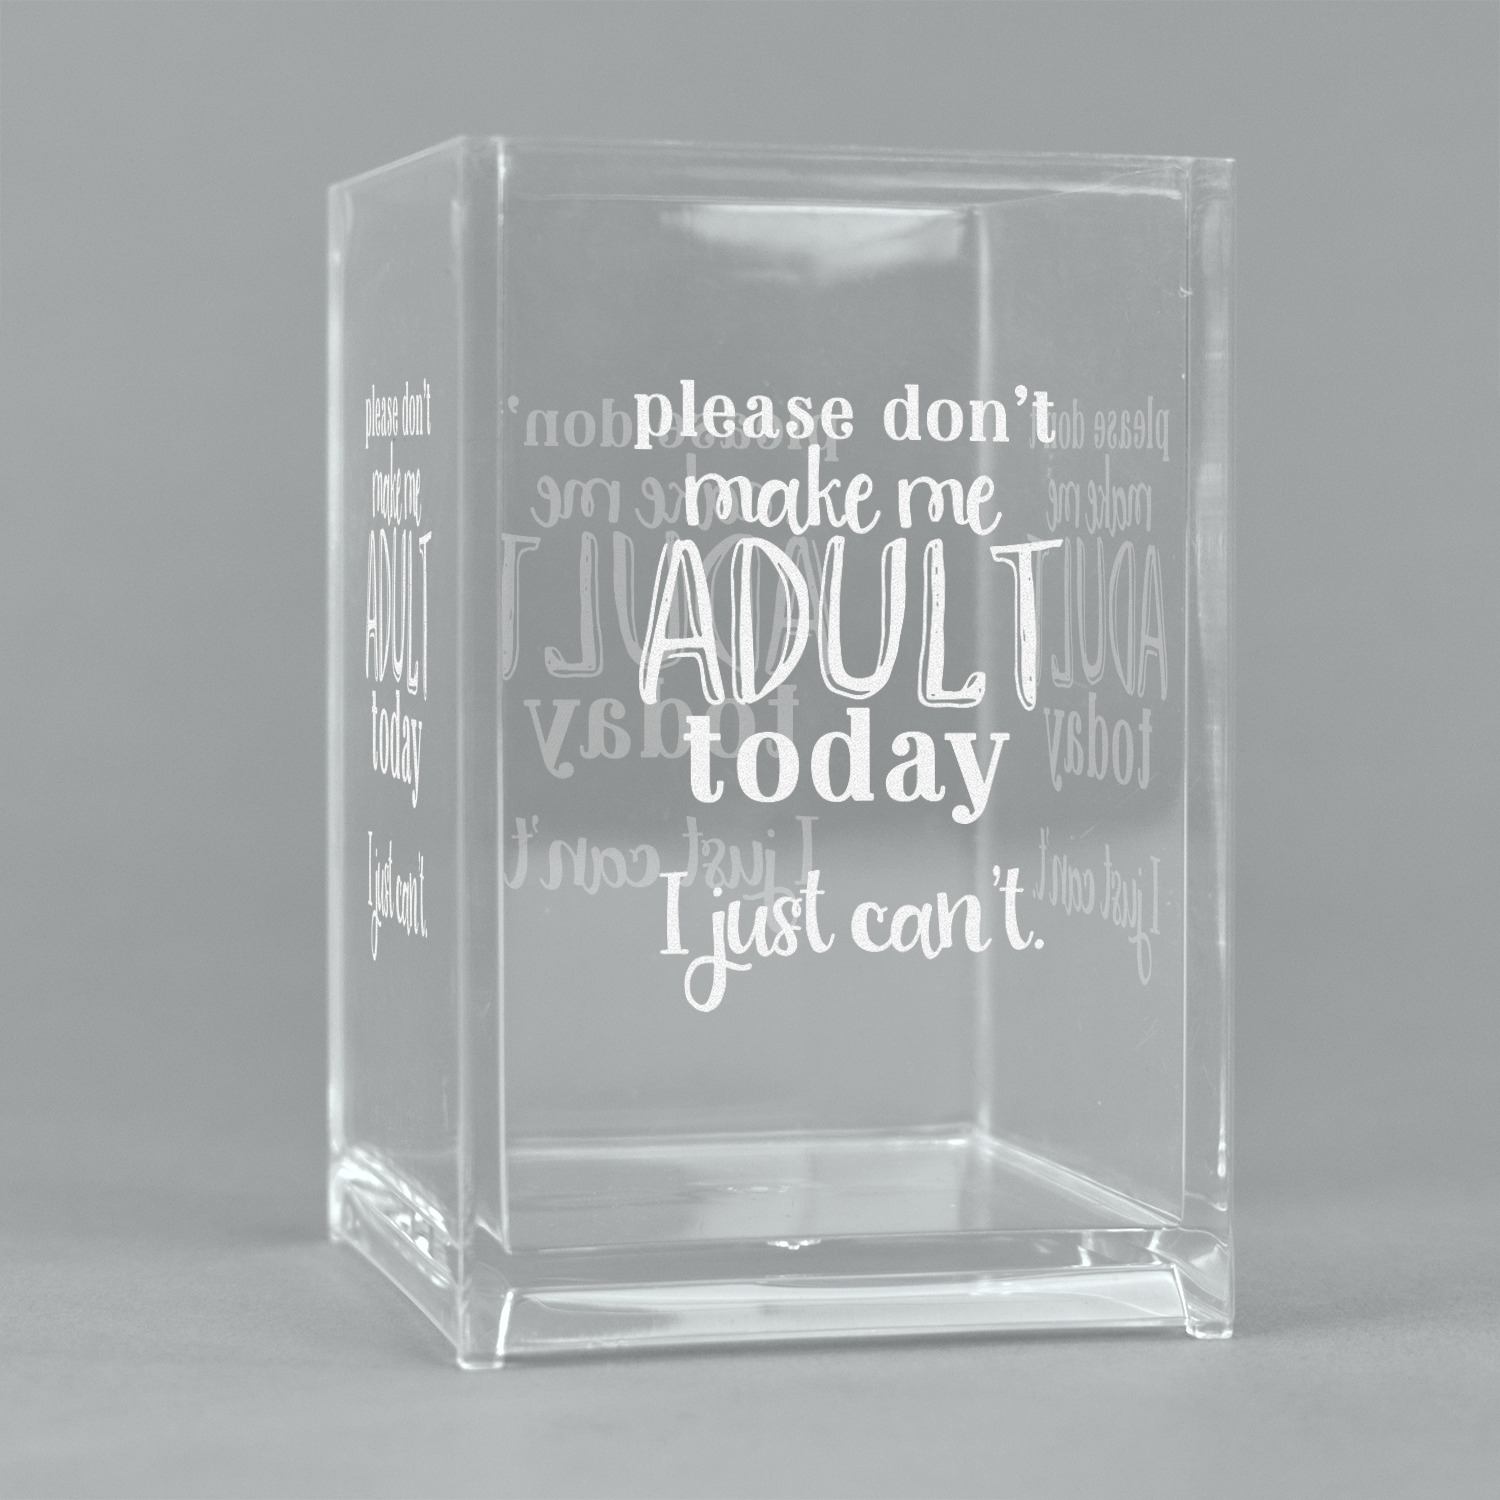 https://www.youcustomizeit.com/common/MAKE/1038321/Funny-Quotes-and-Sayings-Acrylic-Pen-Holder-Angled-View.jpg?lm=1679500079